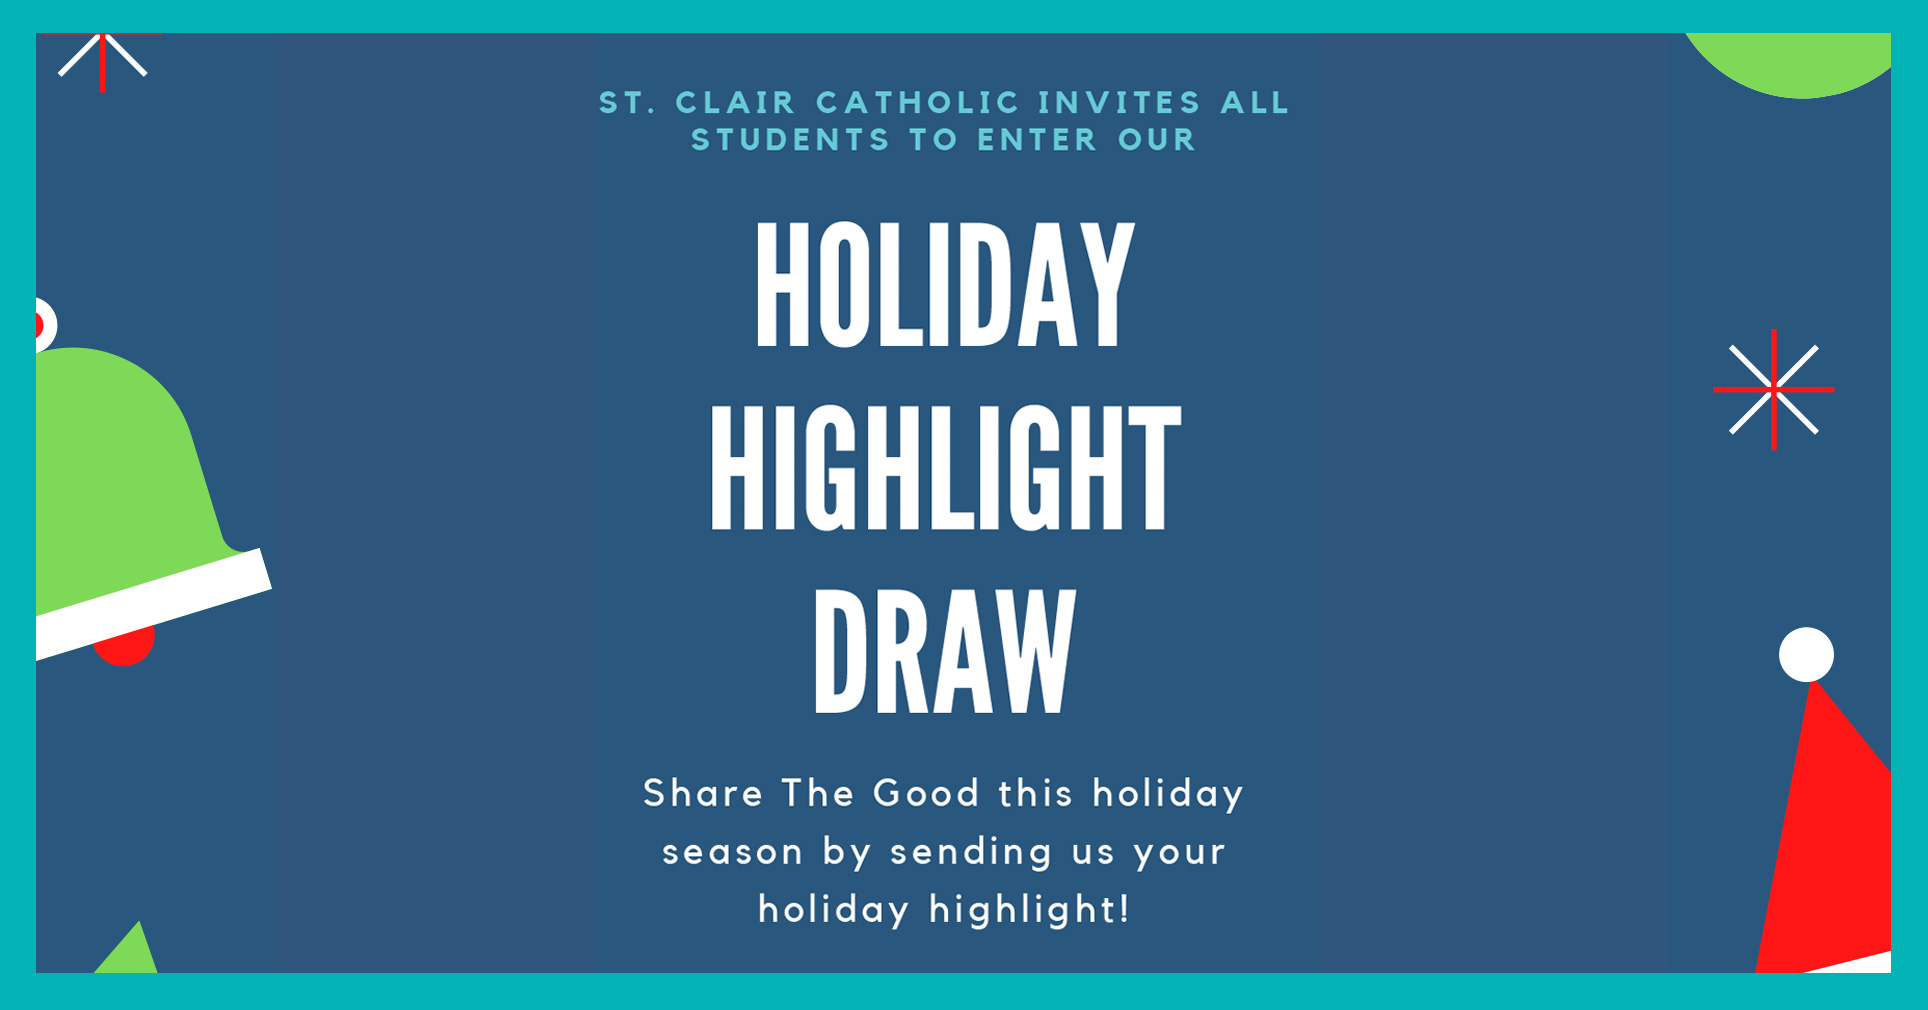 Holiday Highlight Draw – Share The Good and Win